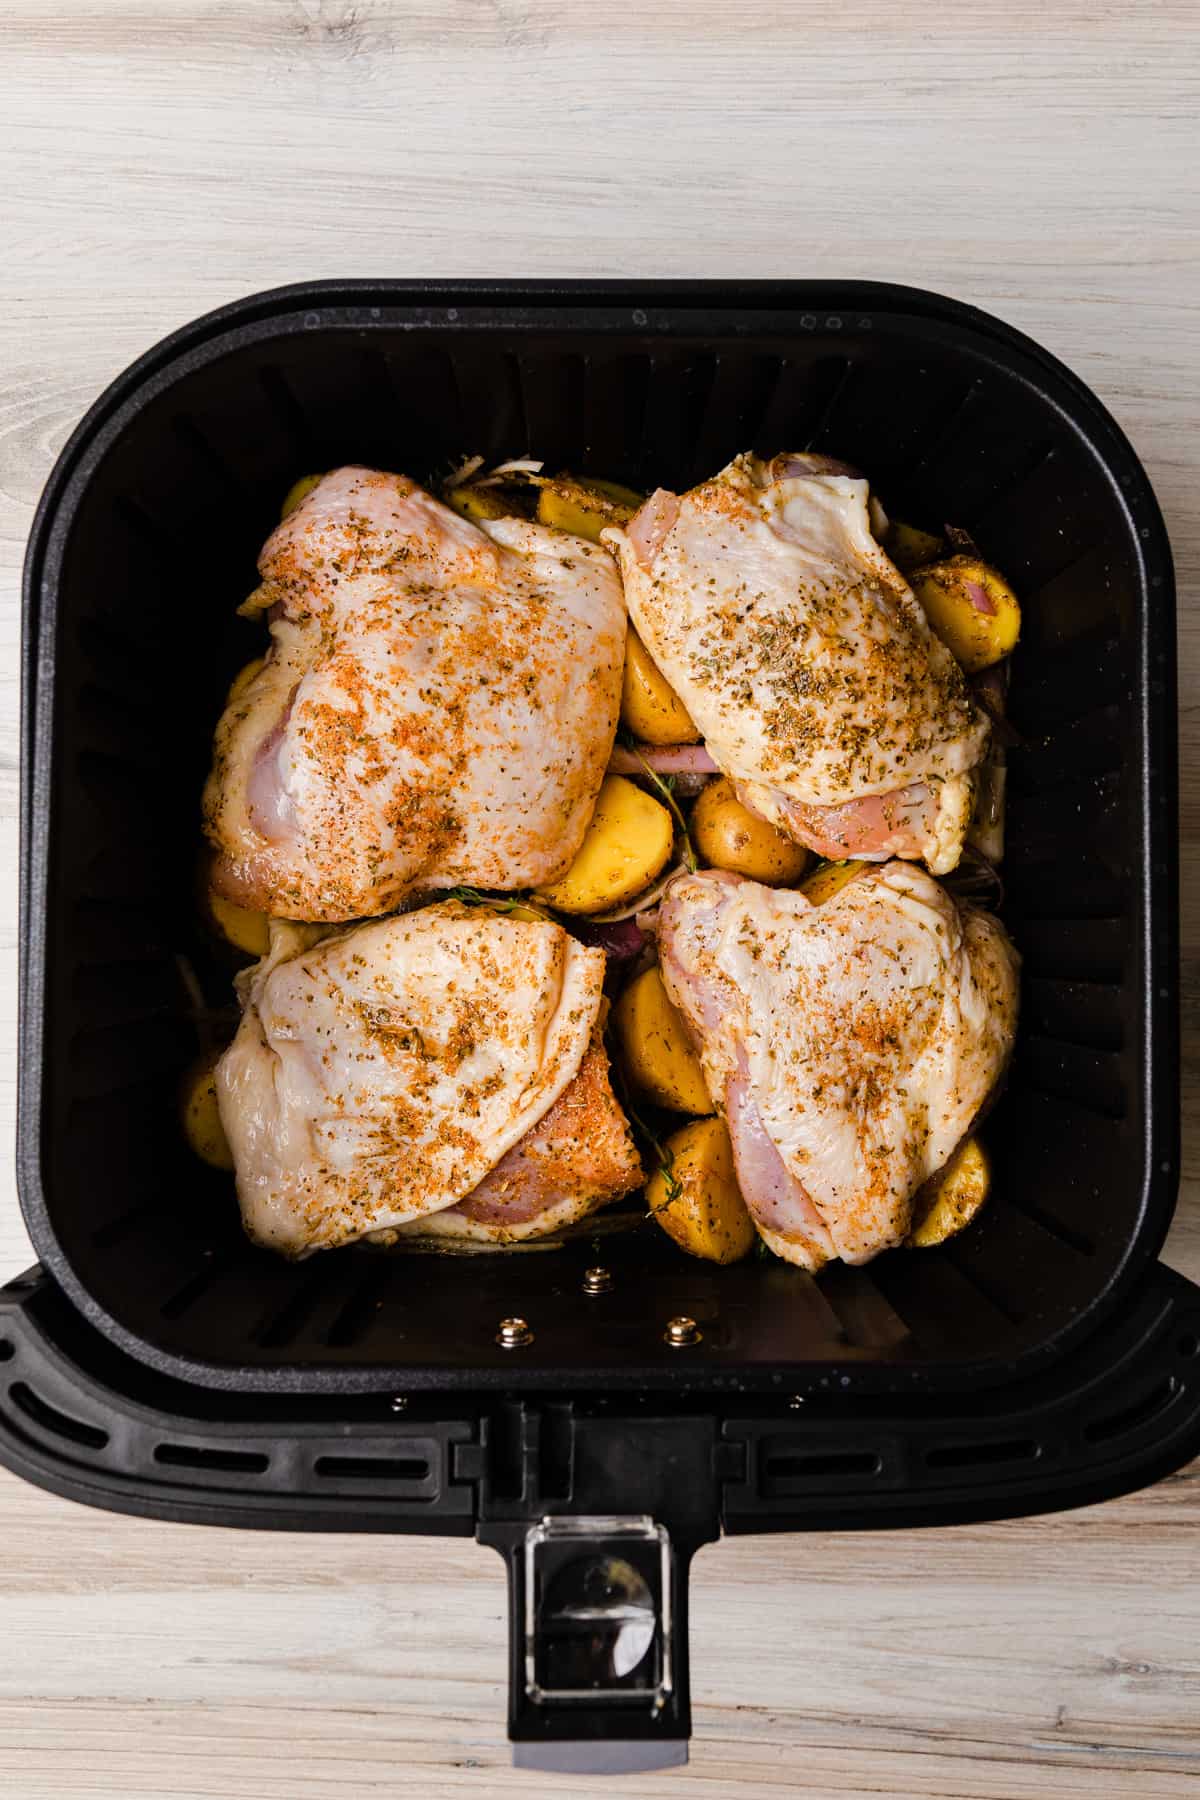 Adding seasoned chicken to the air fryer basket on top of the potatoes.